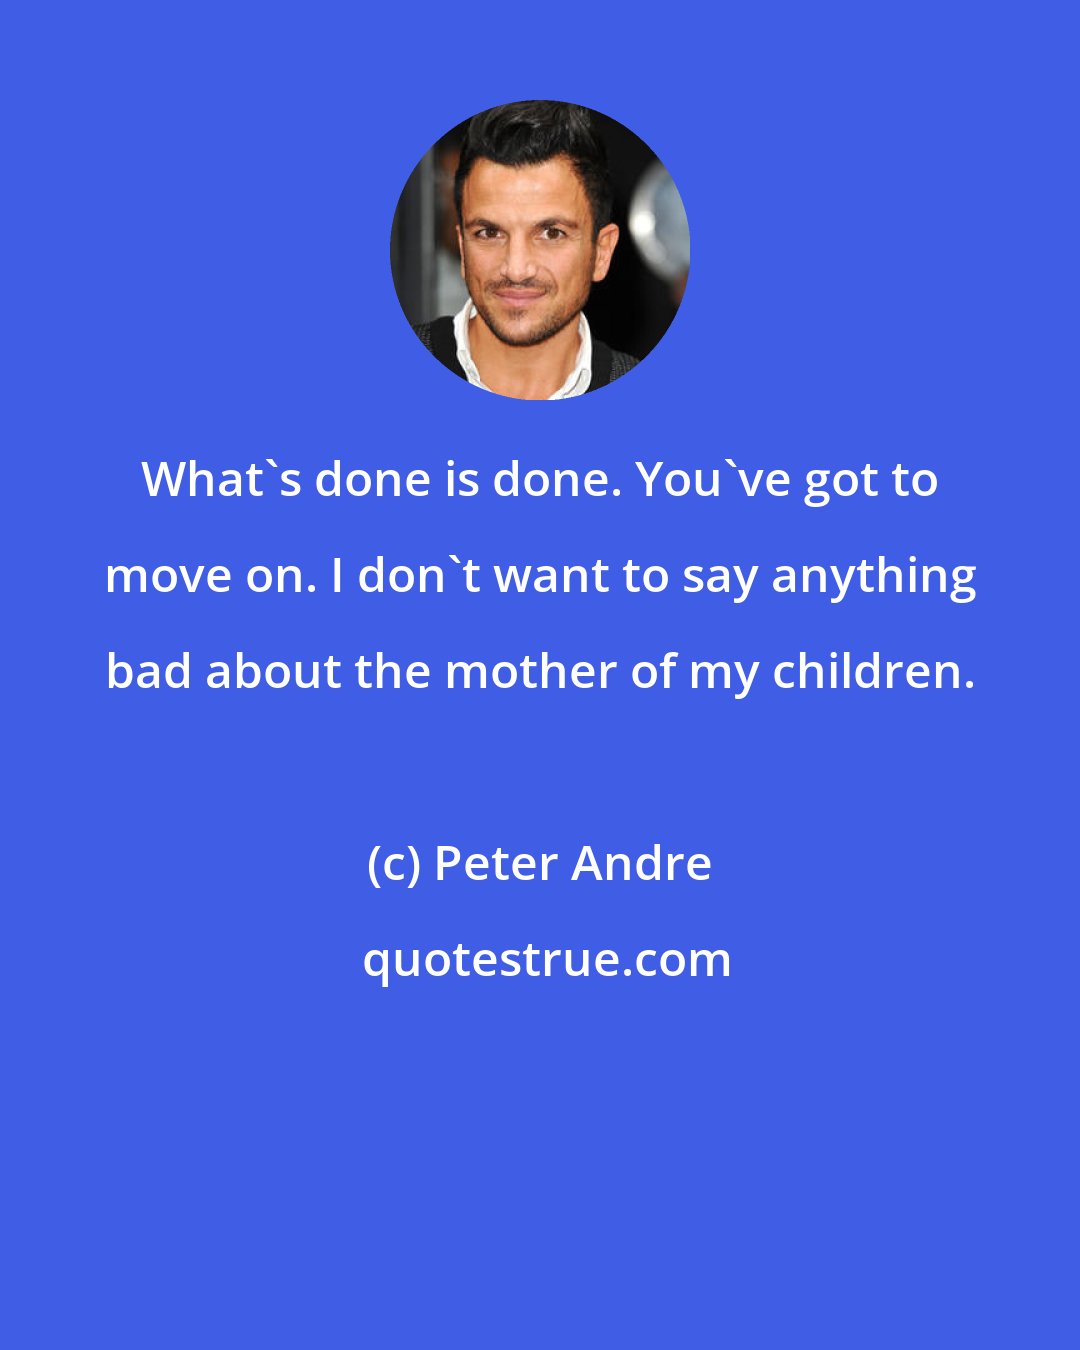 Peter Andre: What's done is done. You've got to move on. I don't want to say anything bad about the mother of my children.